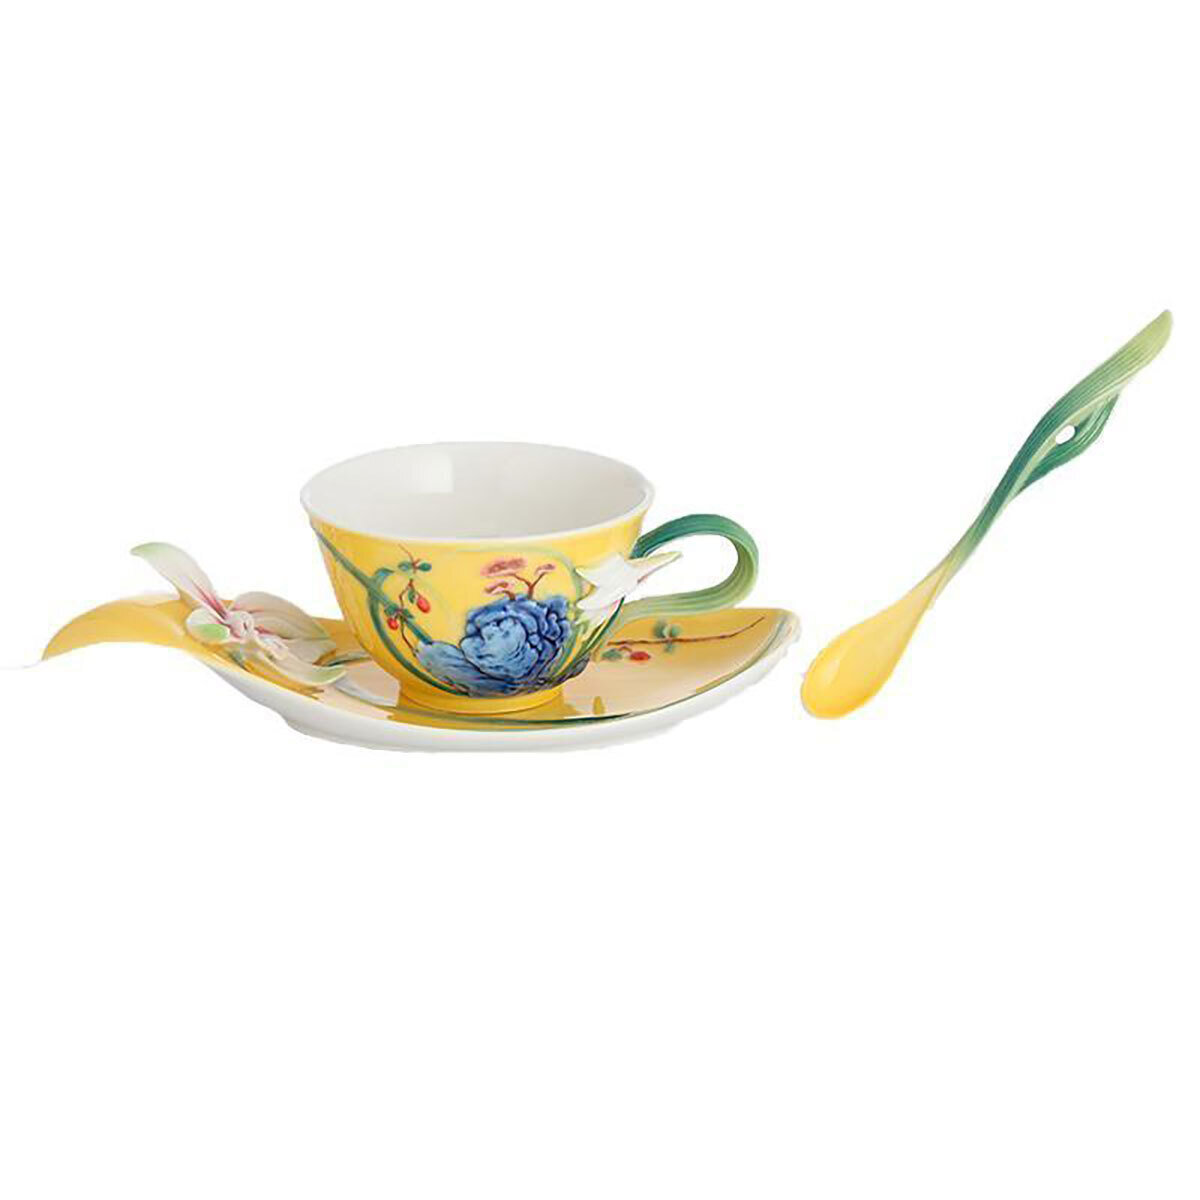 Franz Porcelain Irises Orchids With Grotesque Stone Cup Saucer Spoon Set FZ02794